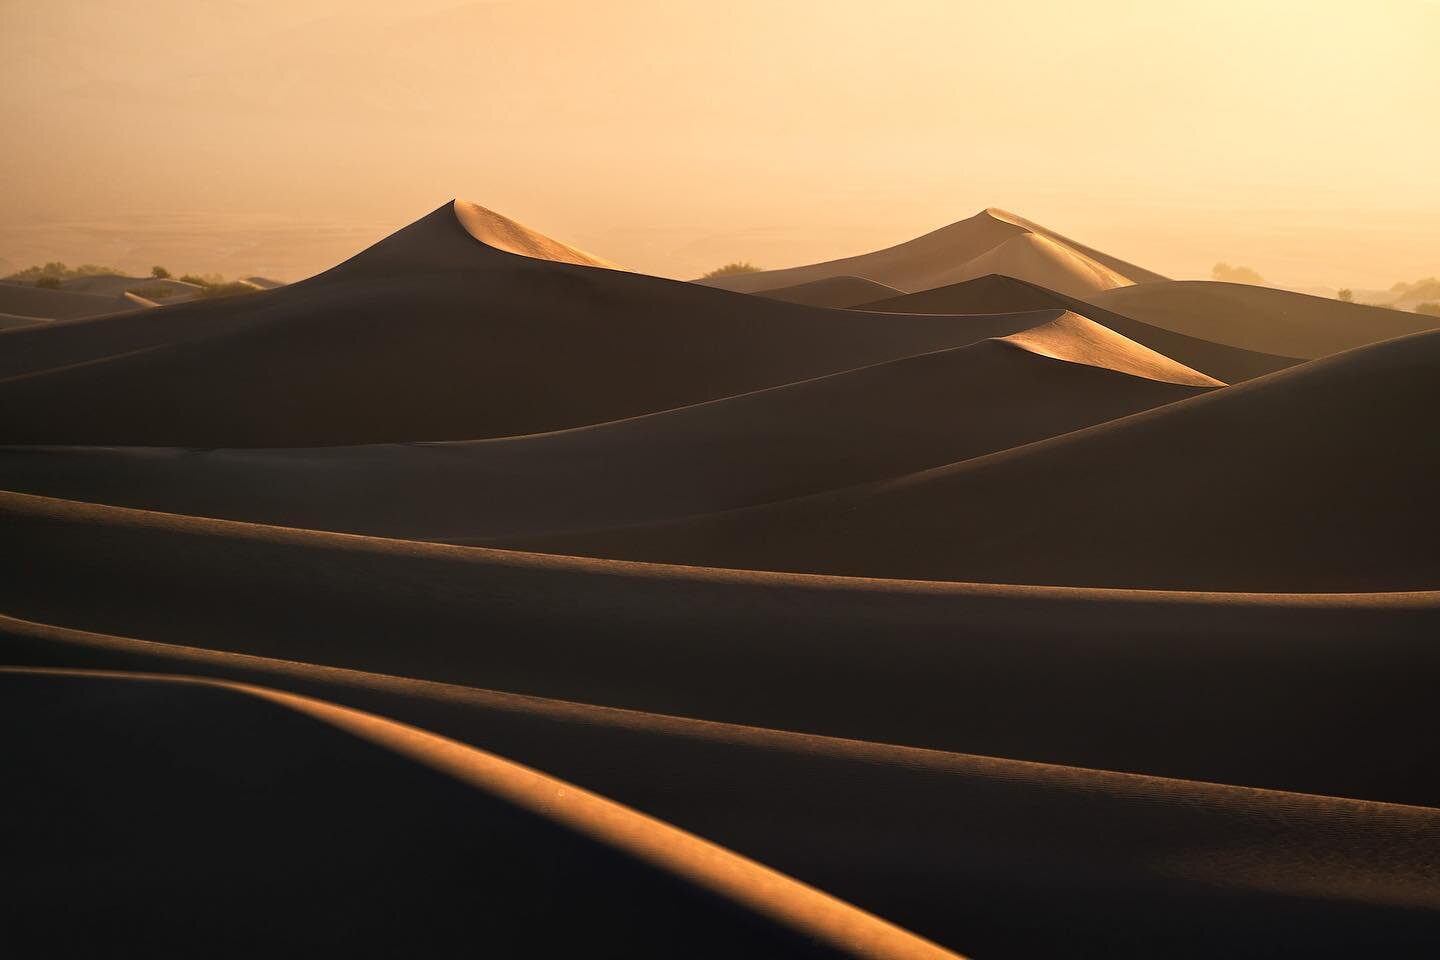 Sunrise on the Dunes
.
A new photo for once!! Took this shot in Death Valley last June. The days we&rsquo;re over 100 degrees, but it was quite nice at sunrise. I love the way that light and shadows play on the smooth curves of the sand dunes.
.
#dea